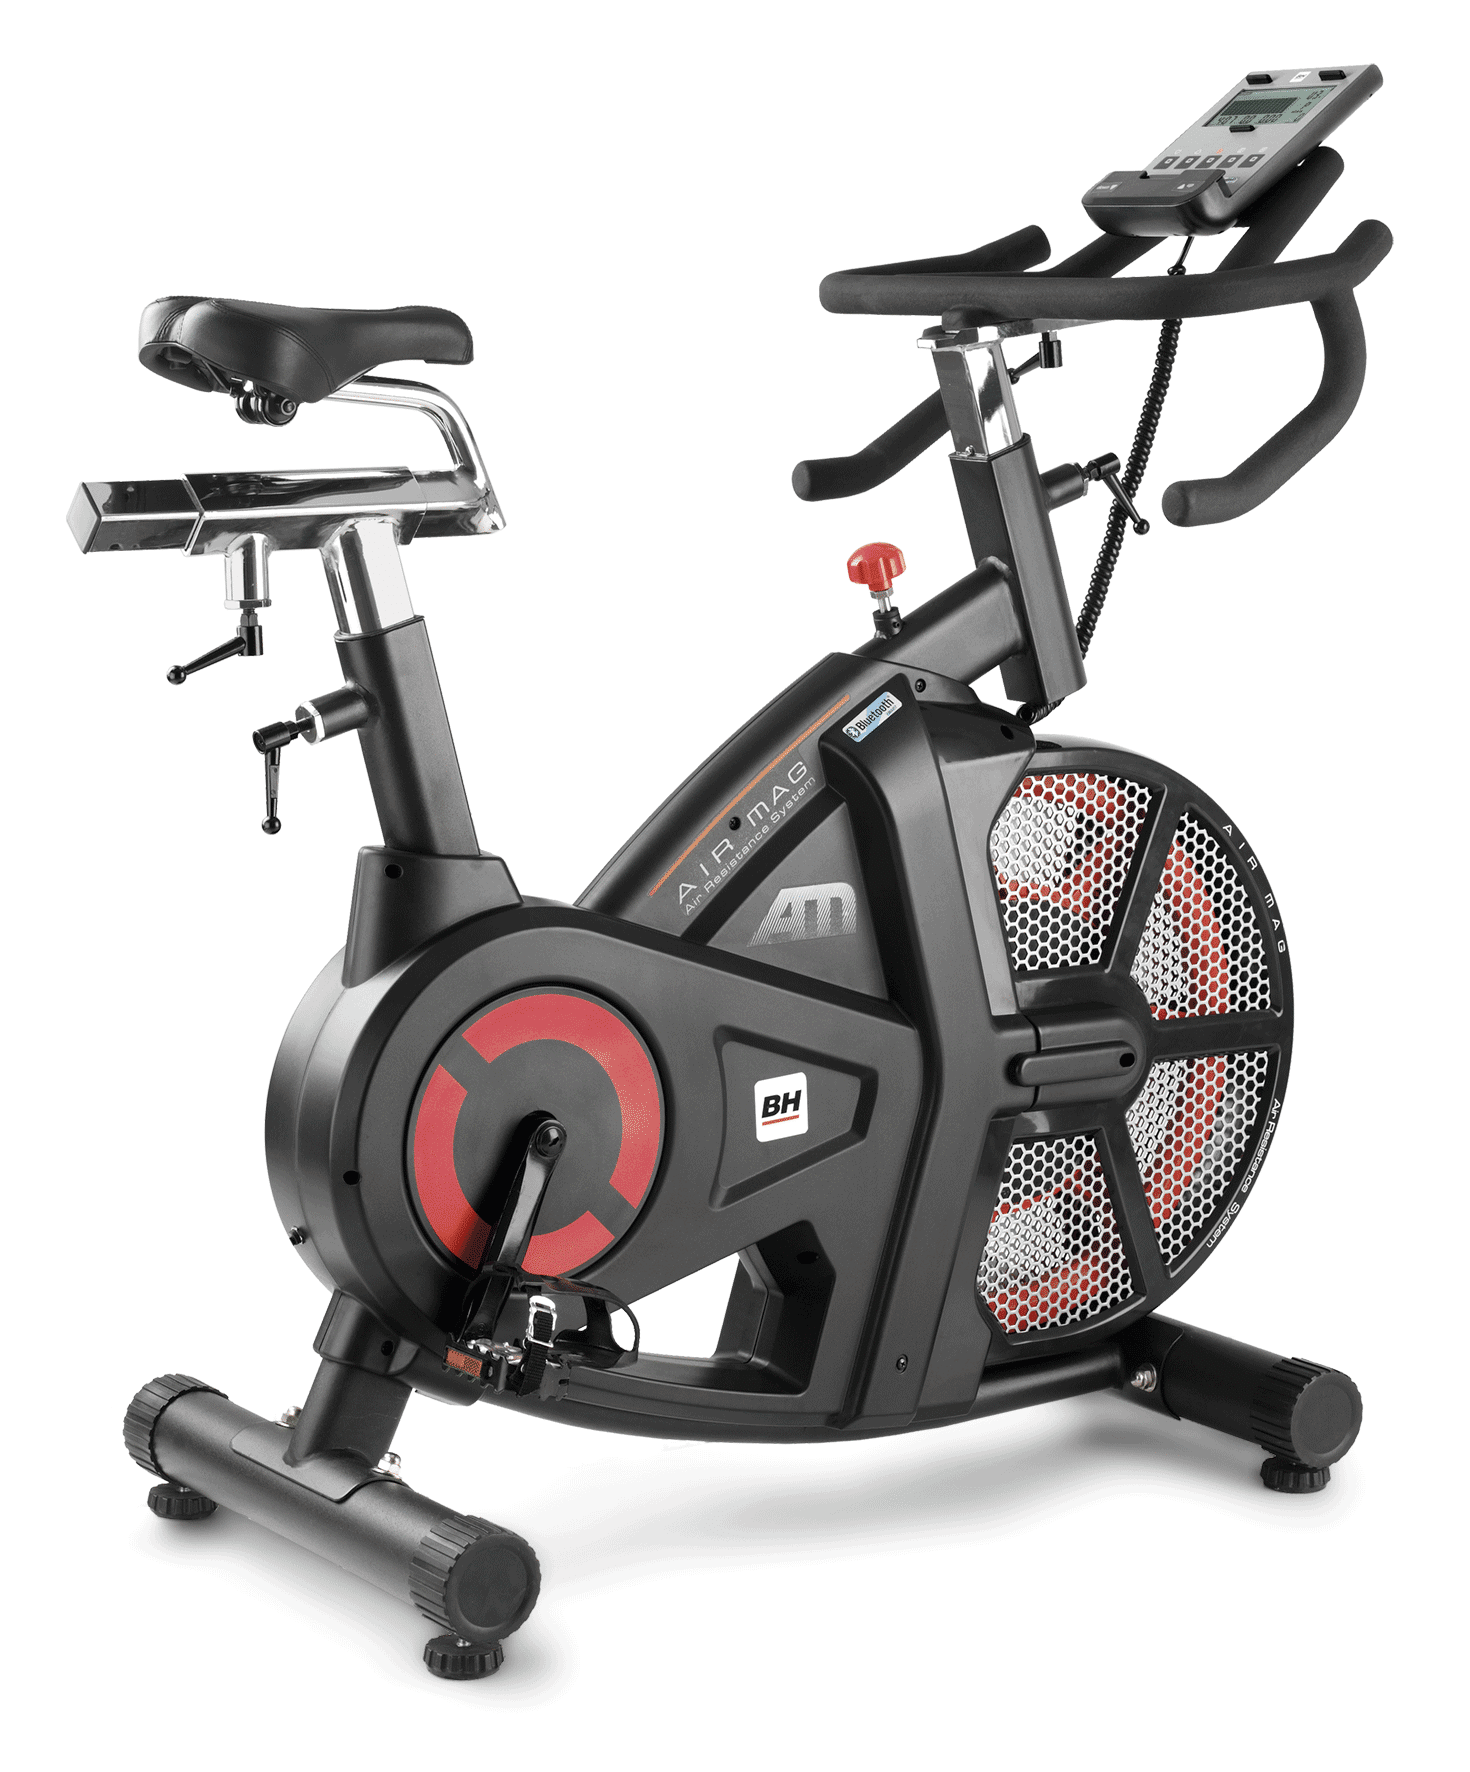 Rower Spiningowy i . Airmag Bluetooth H9122I BH Fitness